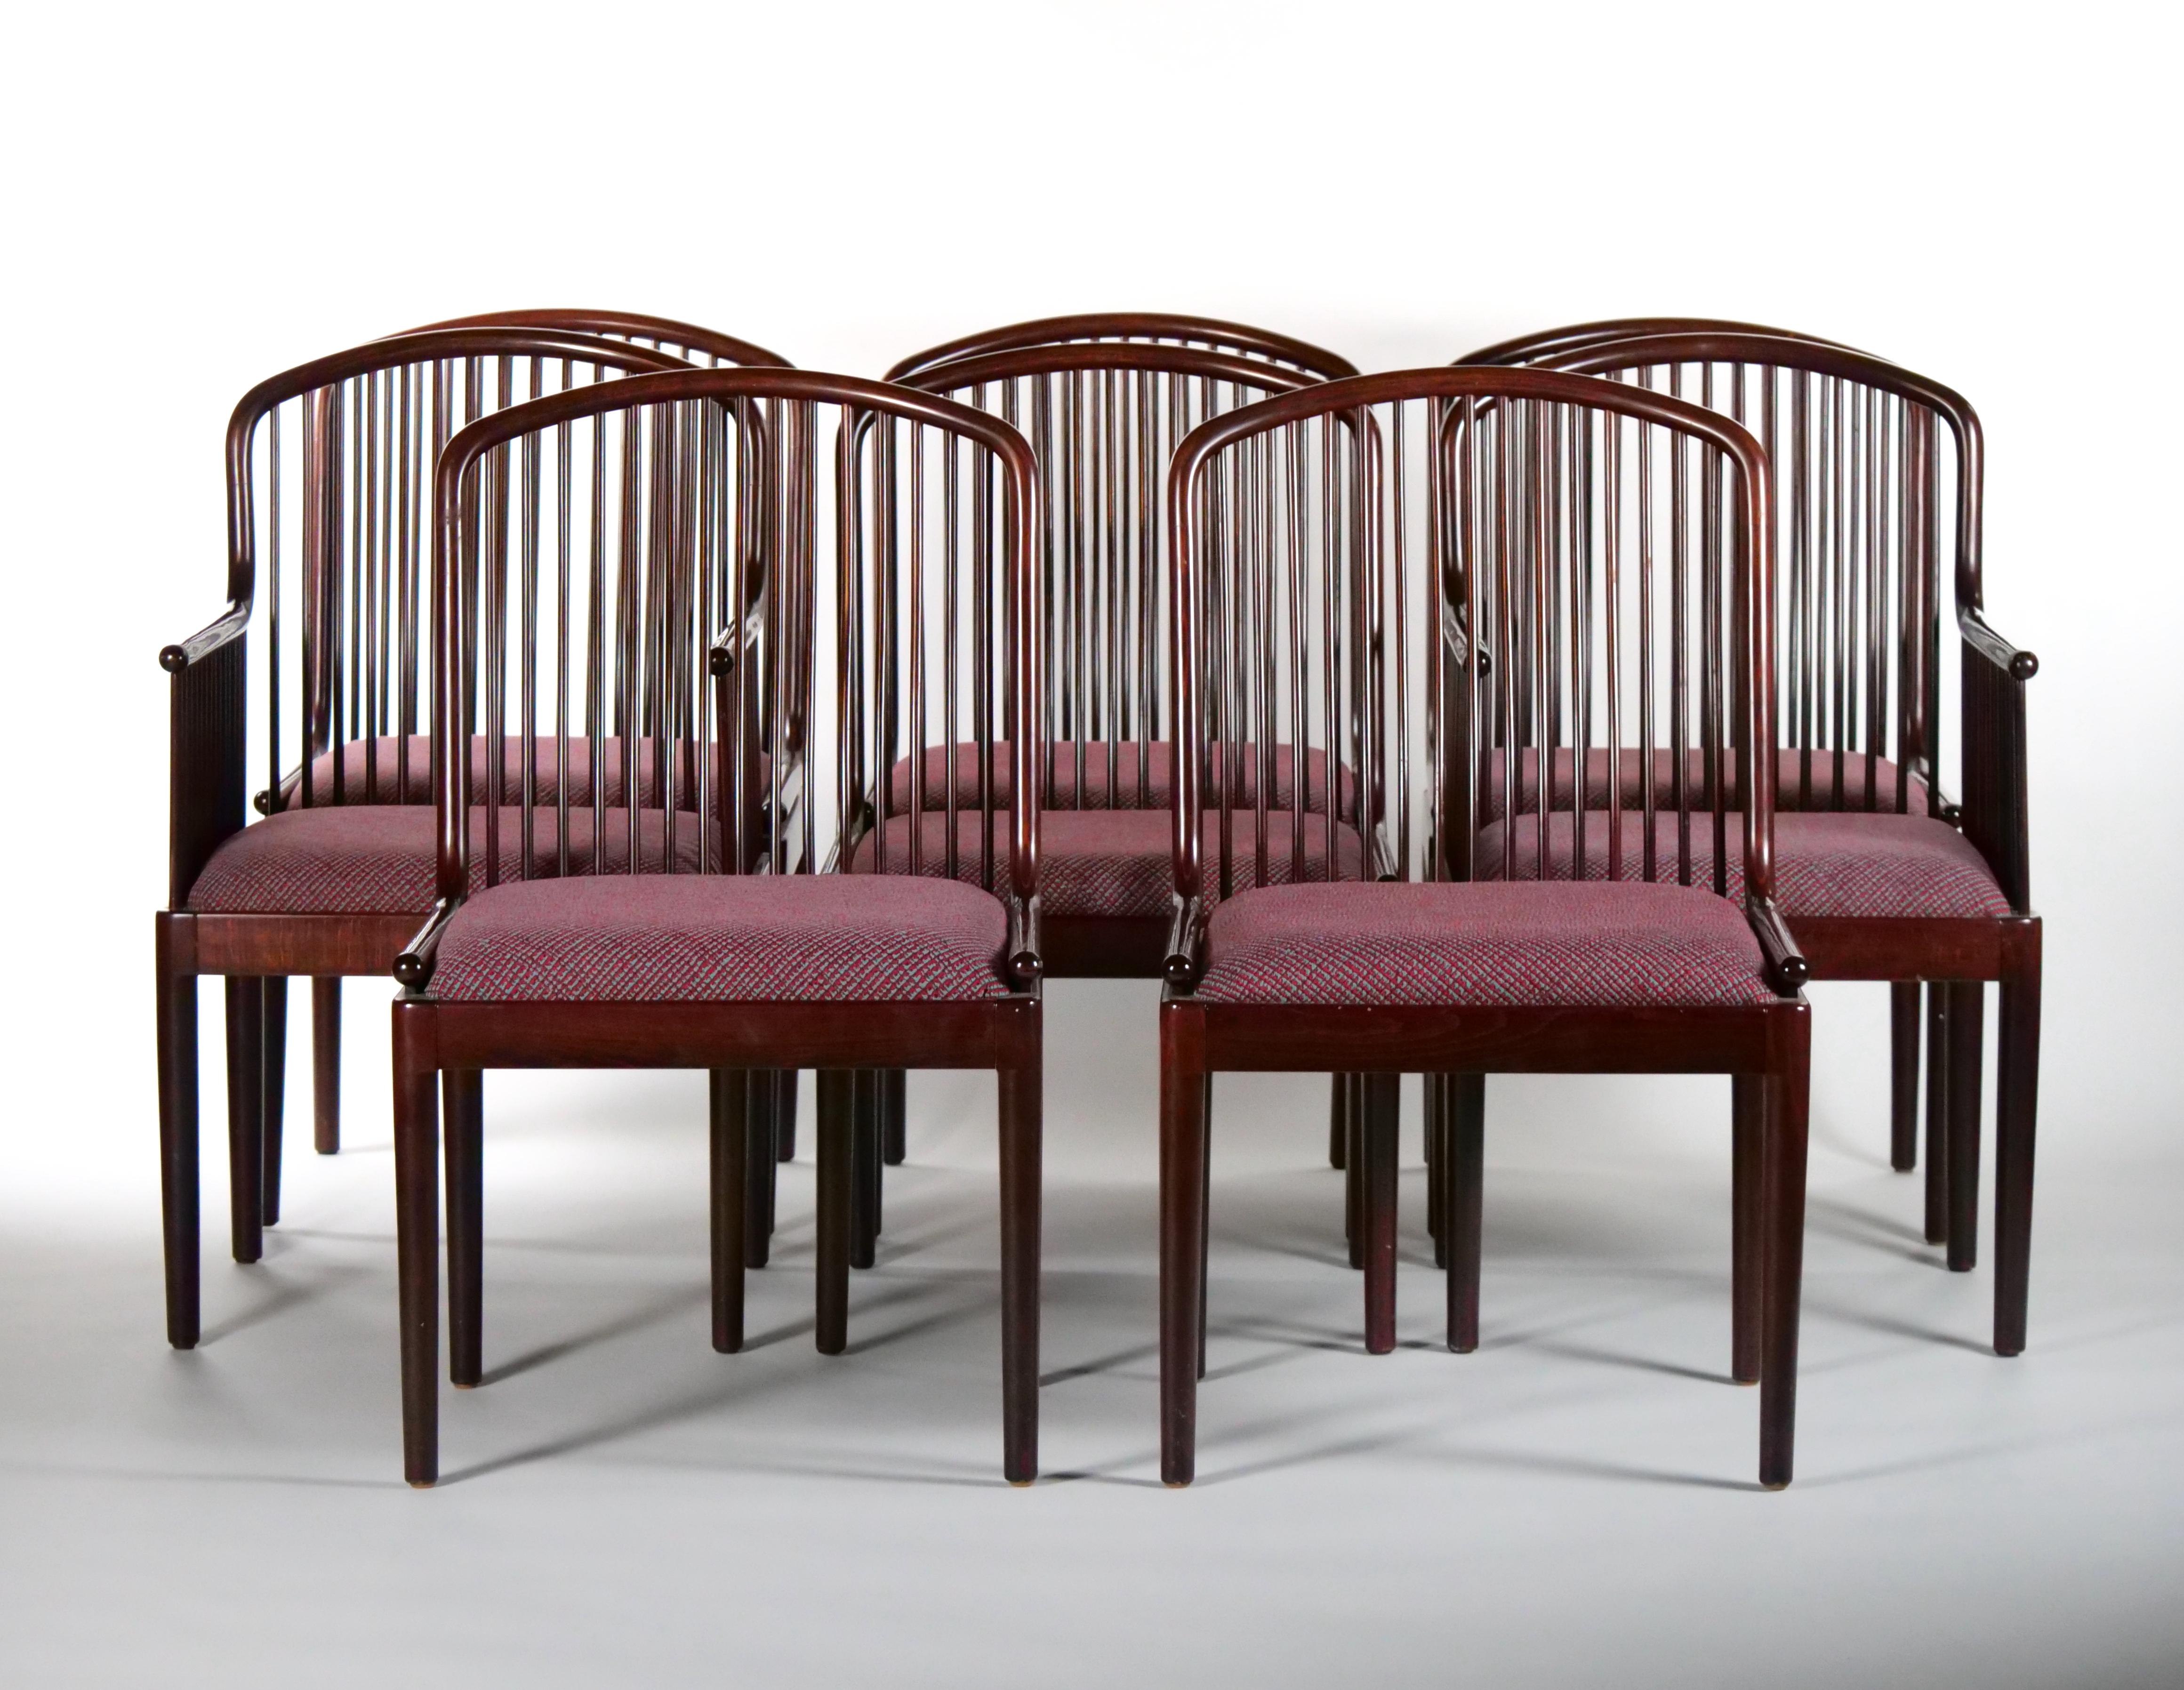 Beautiful craftsmanship set of eight Mid-Century Modern dining room chair. The set include six side chairs and two armchairs. The armchair features a slatted back design with straight barrel legs and conforming armrests. Each seat is upholstered